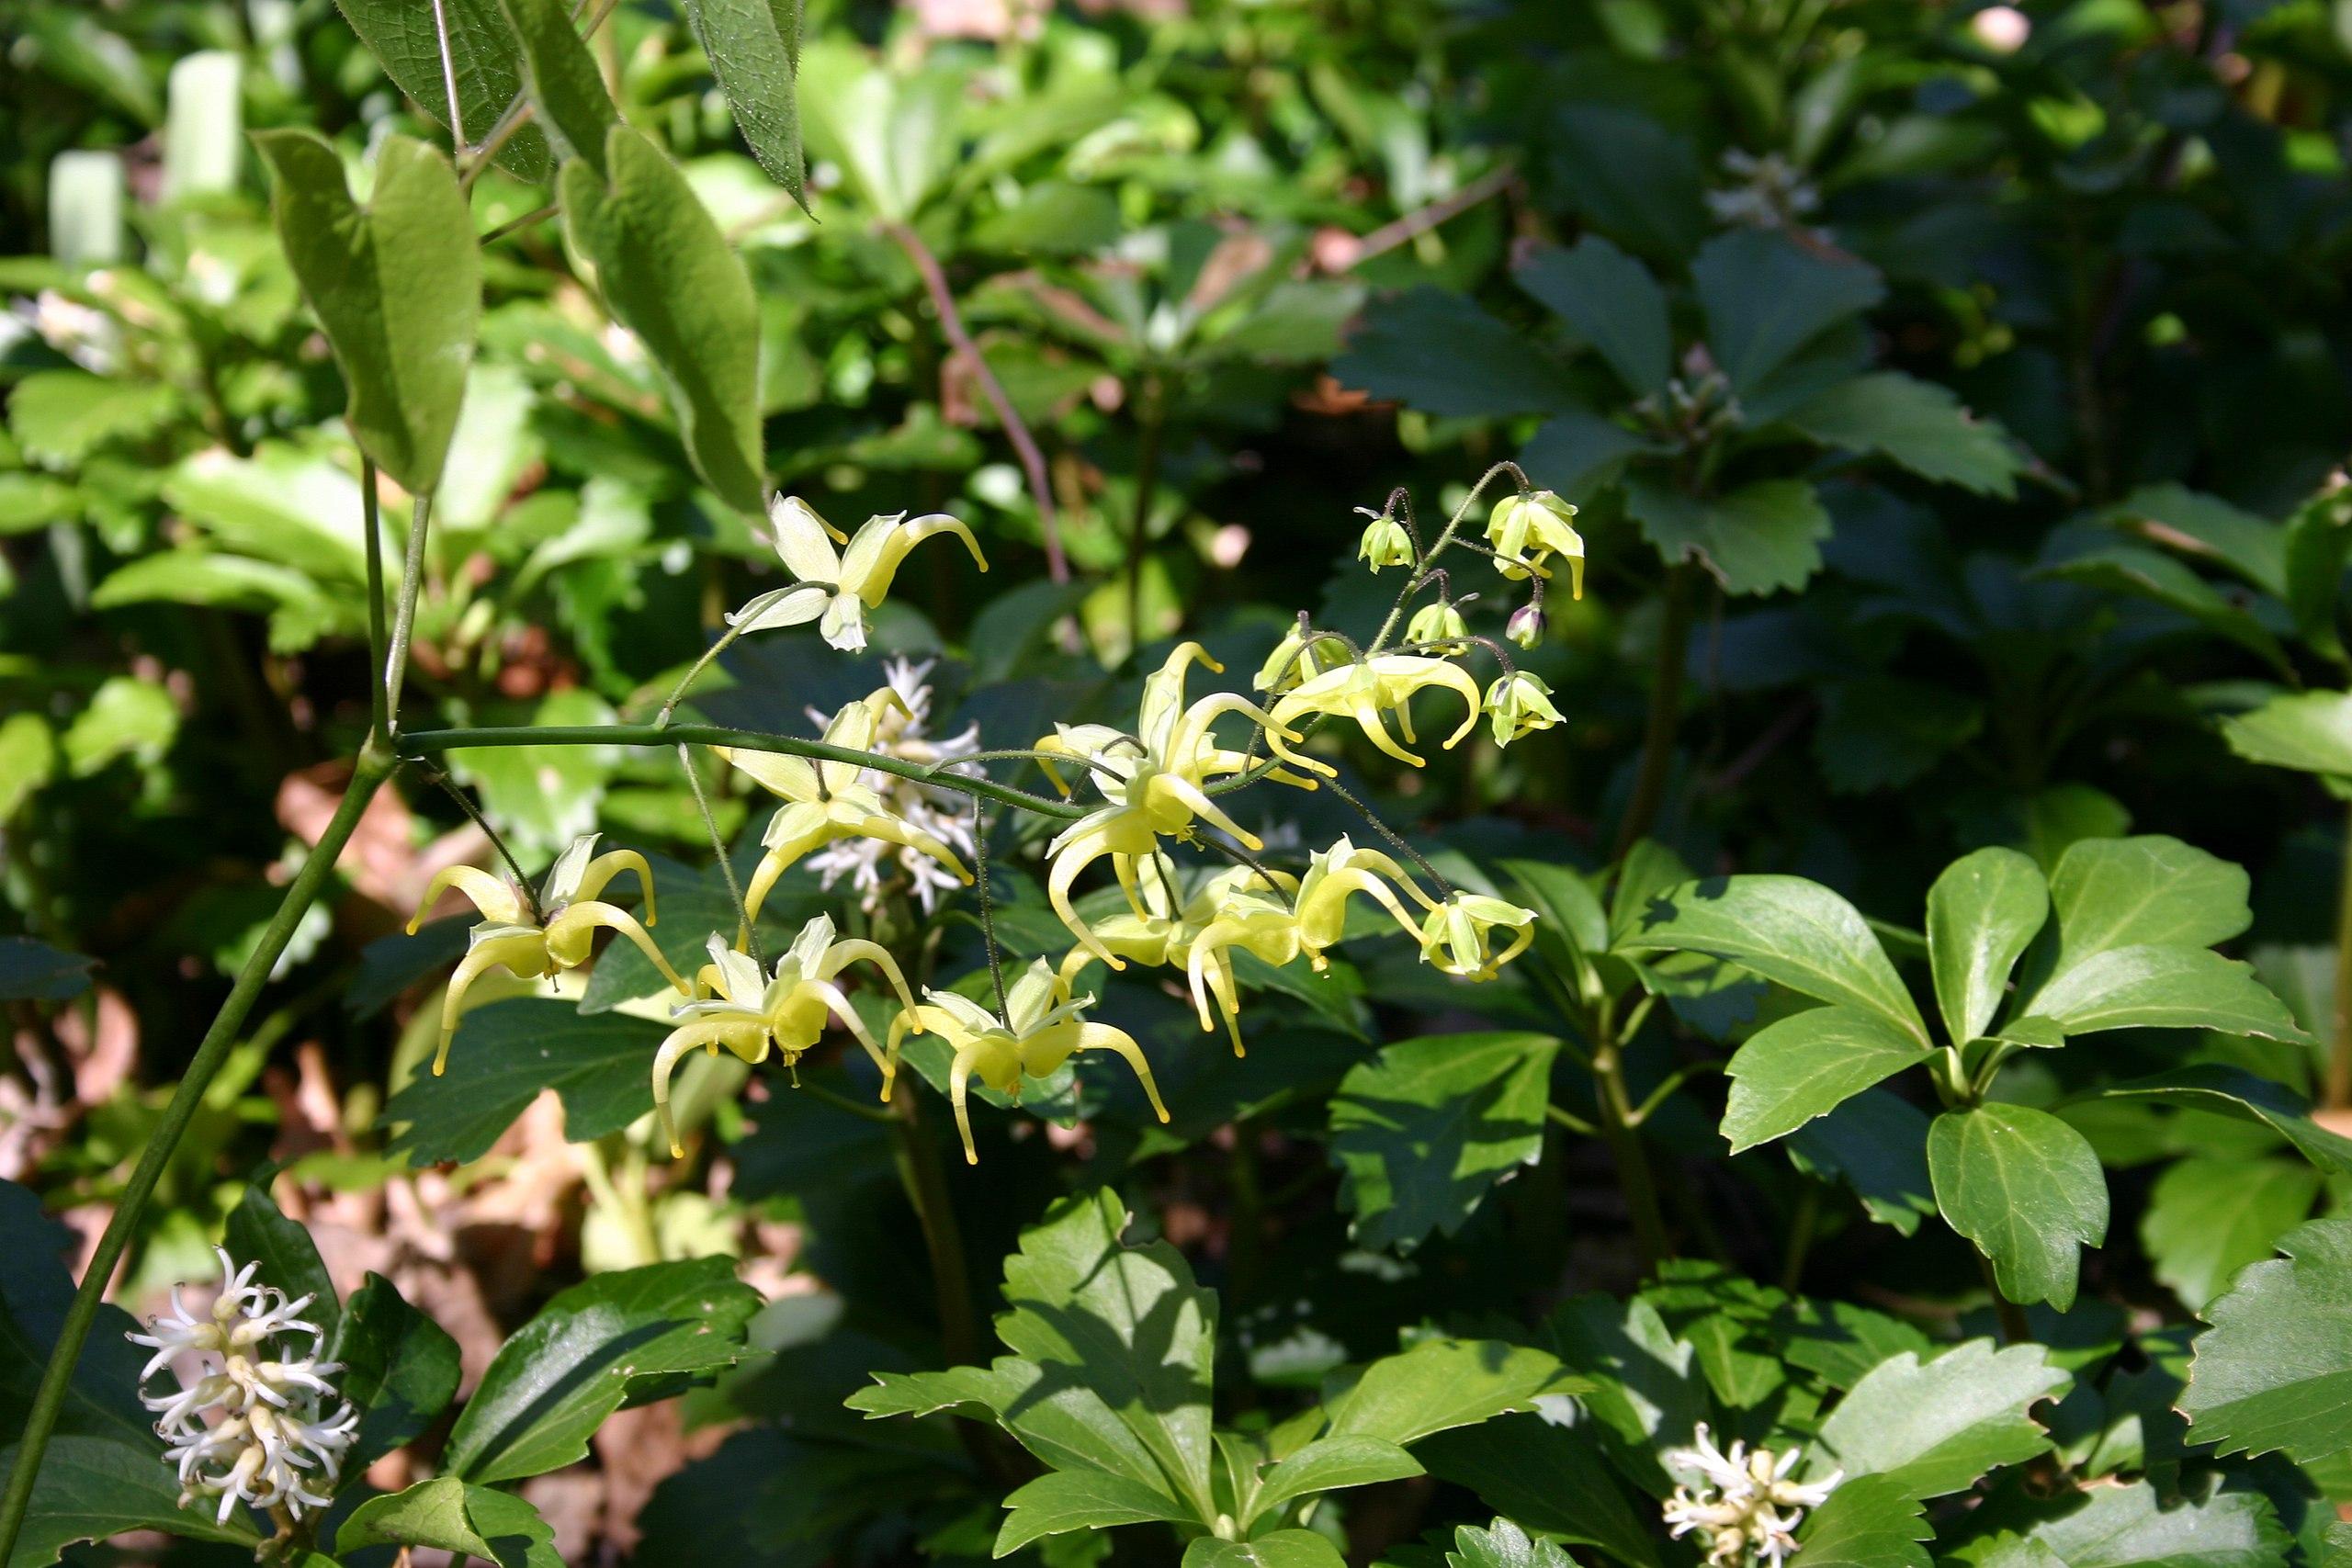 white-yellow flowers with lime-olive leaves and green stems